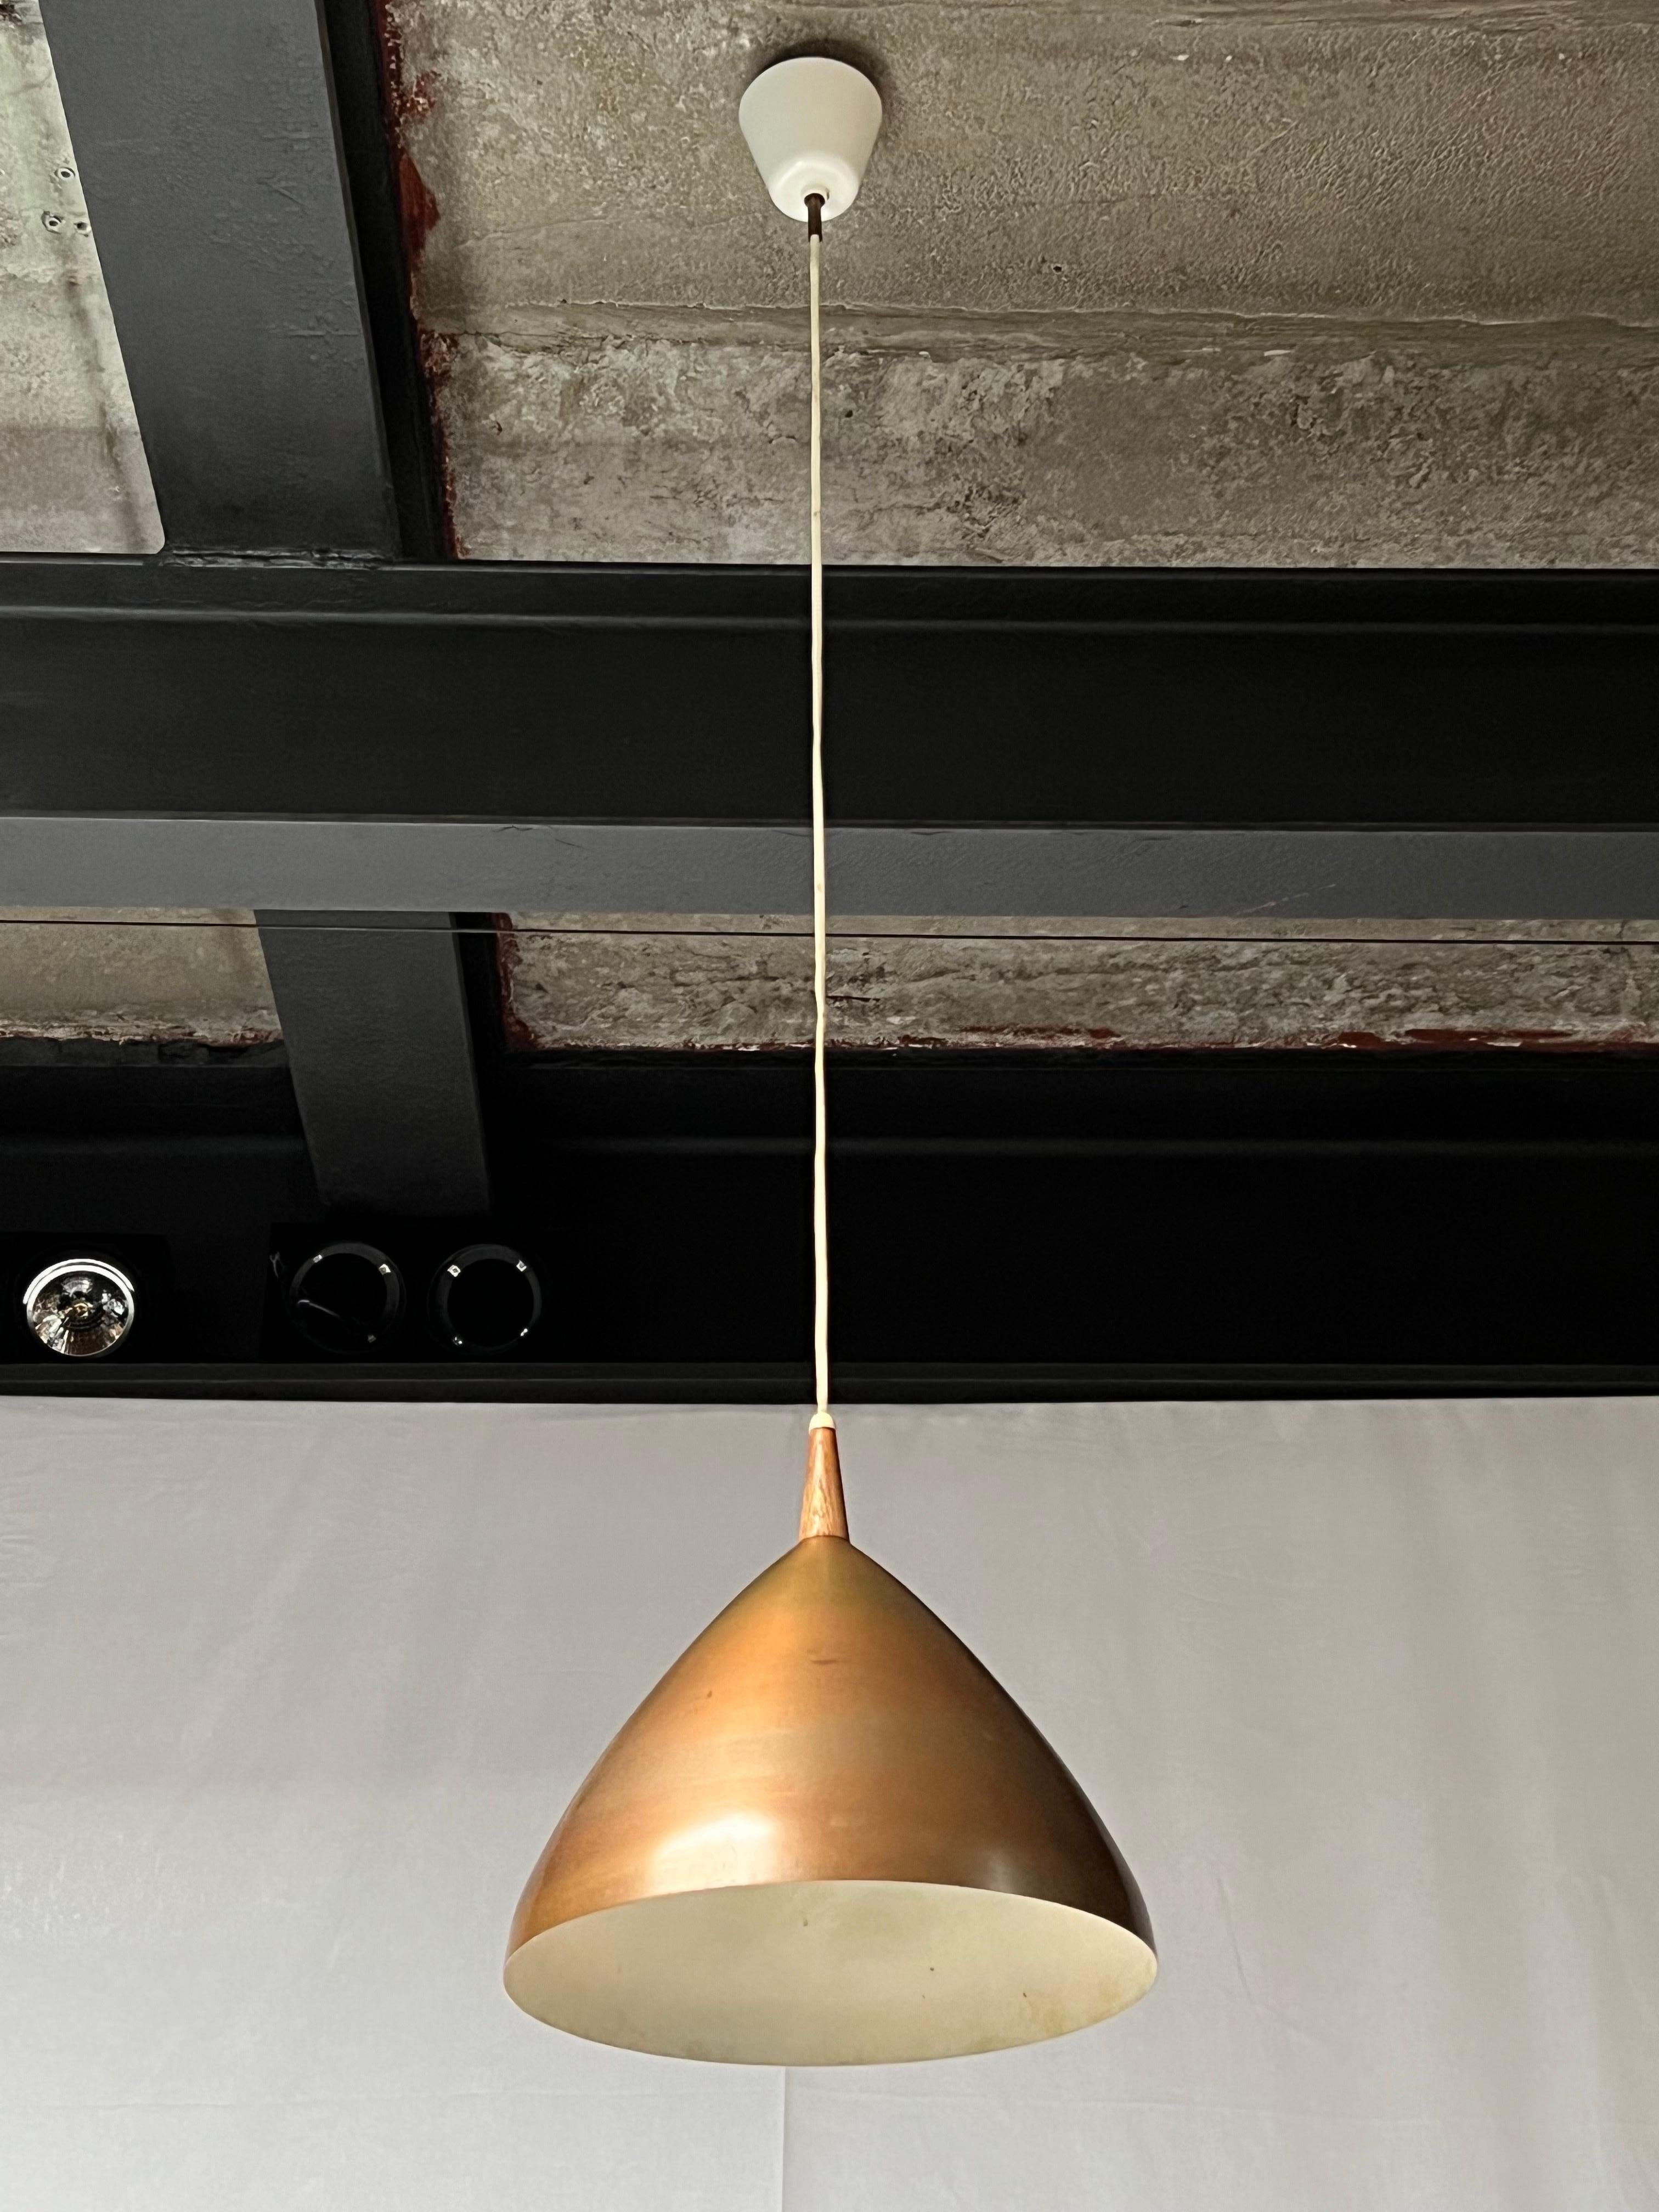 Nice copper suspension. It is providing a warm atmosphere and even better when lighted. There's a teak pipe above the Cooper shade and. Minimal details. Little dent on the top plastic above the teak (see